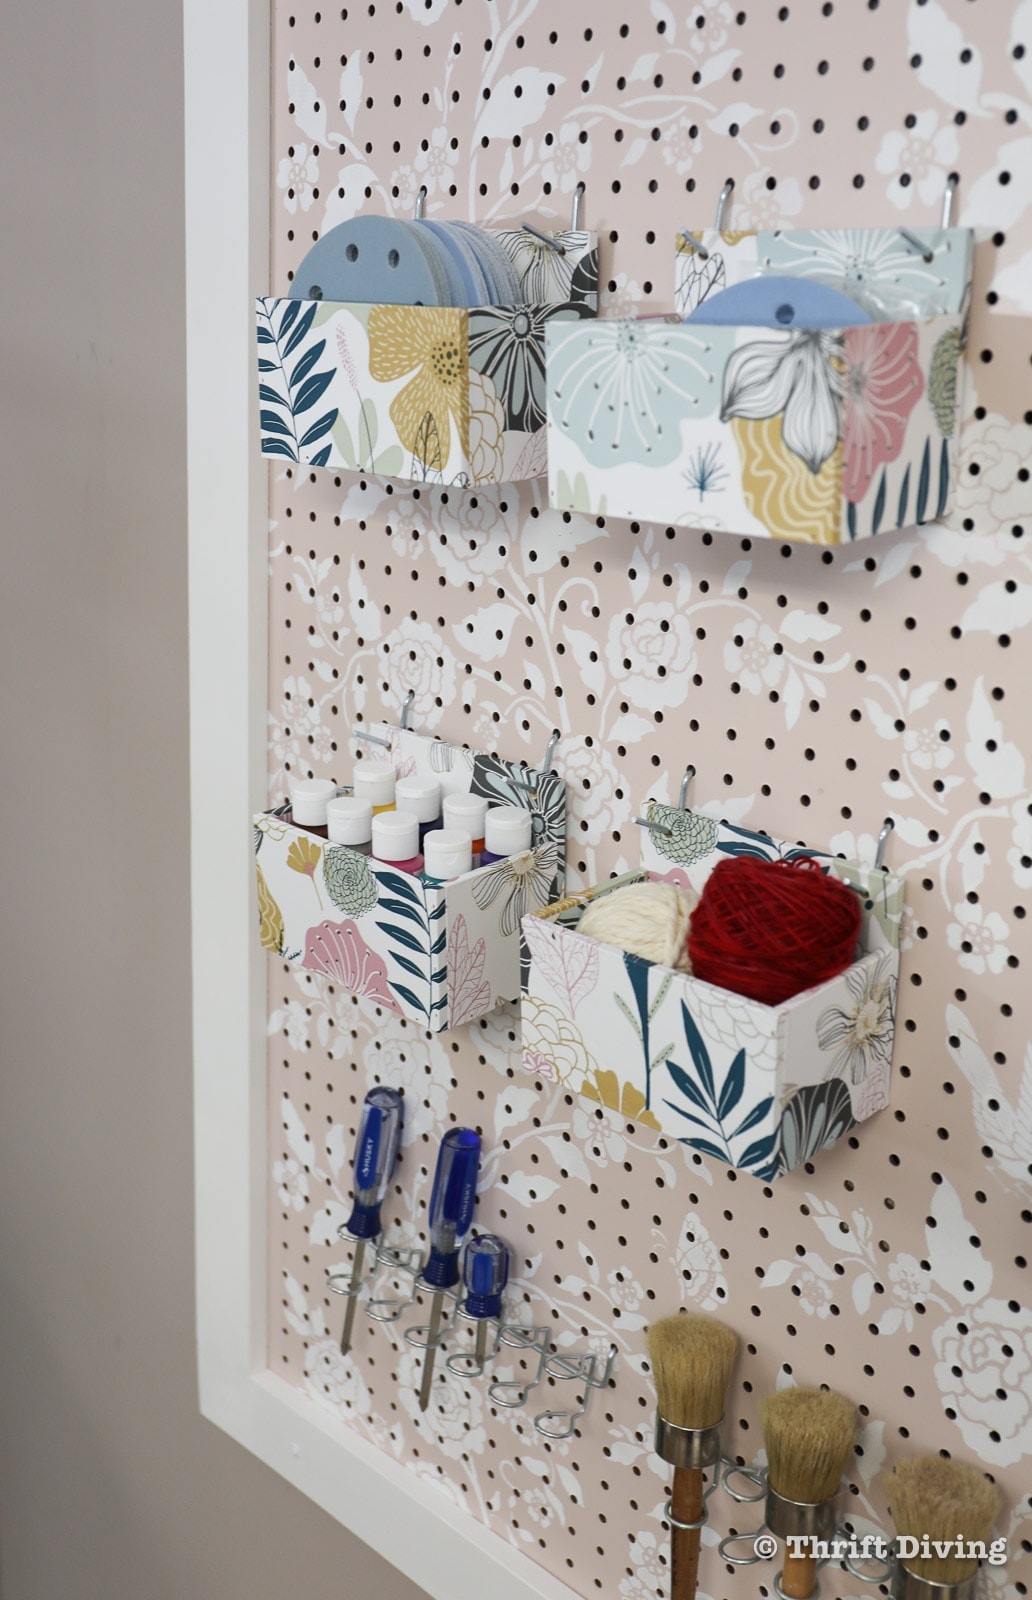 How to Paint a Metal File Cabinet - Make your own pretty organizers to add storage to the side of a file cabinet. - Thrift Diving